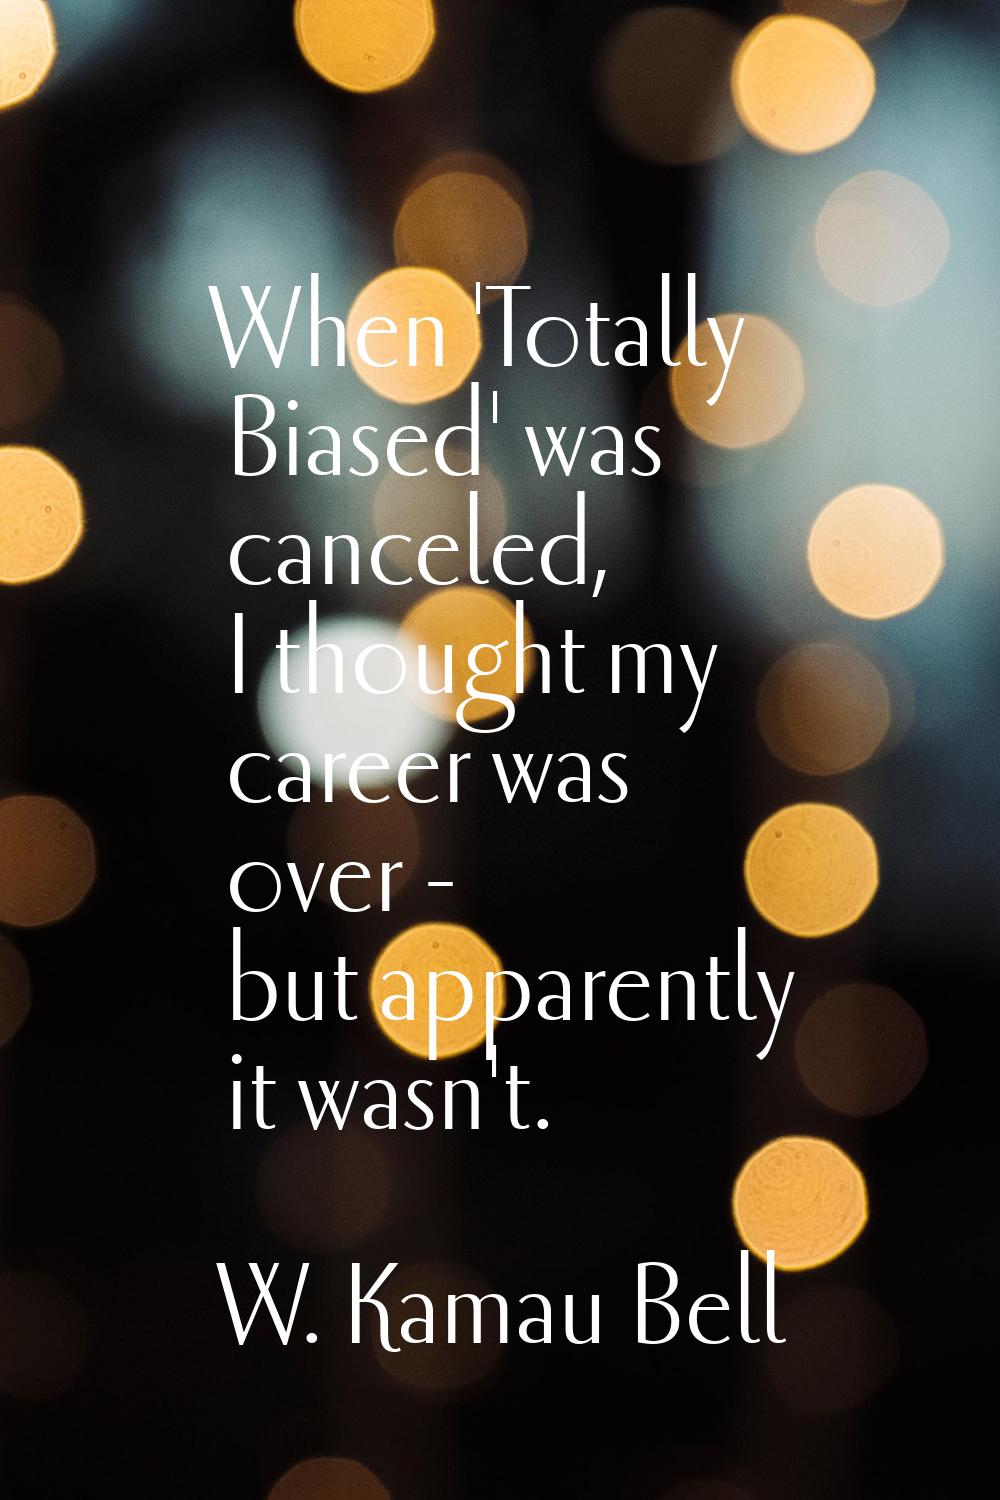 When 'Totally Biased' was canceled, I thought my career was over - but apparently it wasn't.